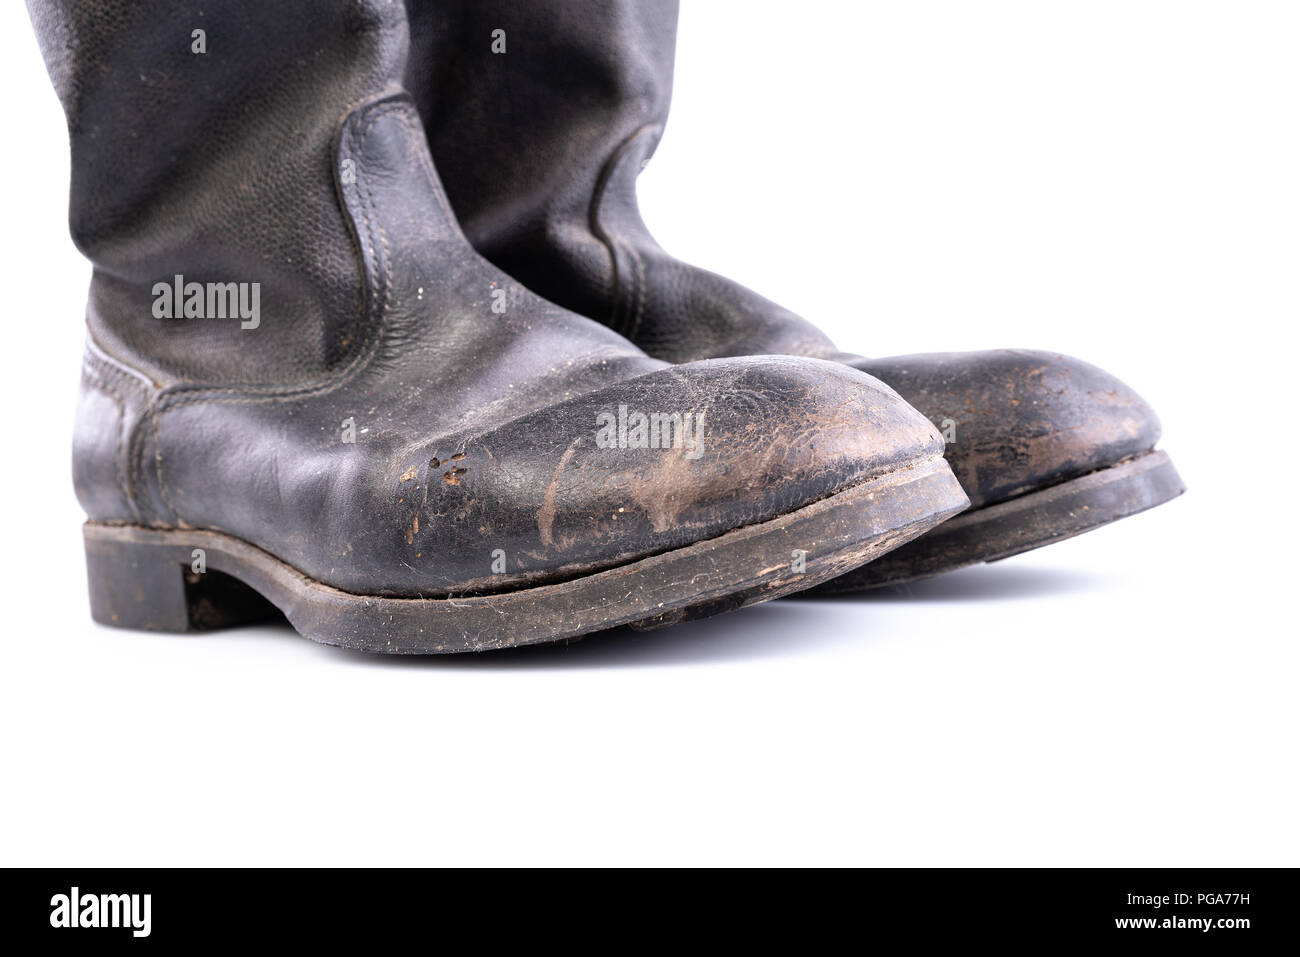 Retro boots - Kirza boots on white background, used in Soviet Union for soldiers in the army and for work, made of artificial leather Stock Photo